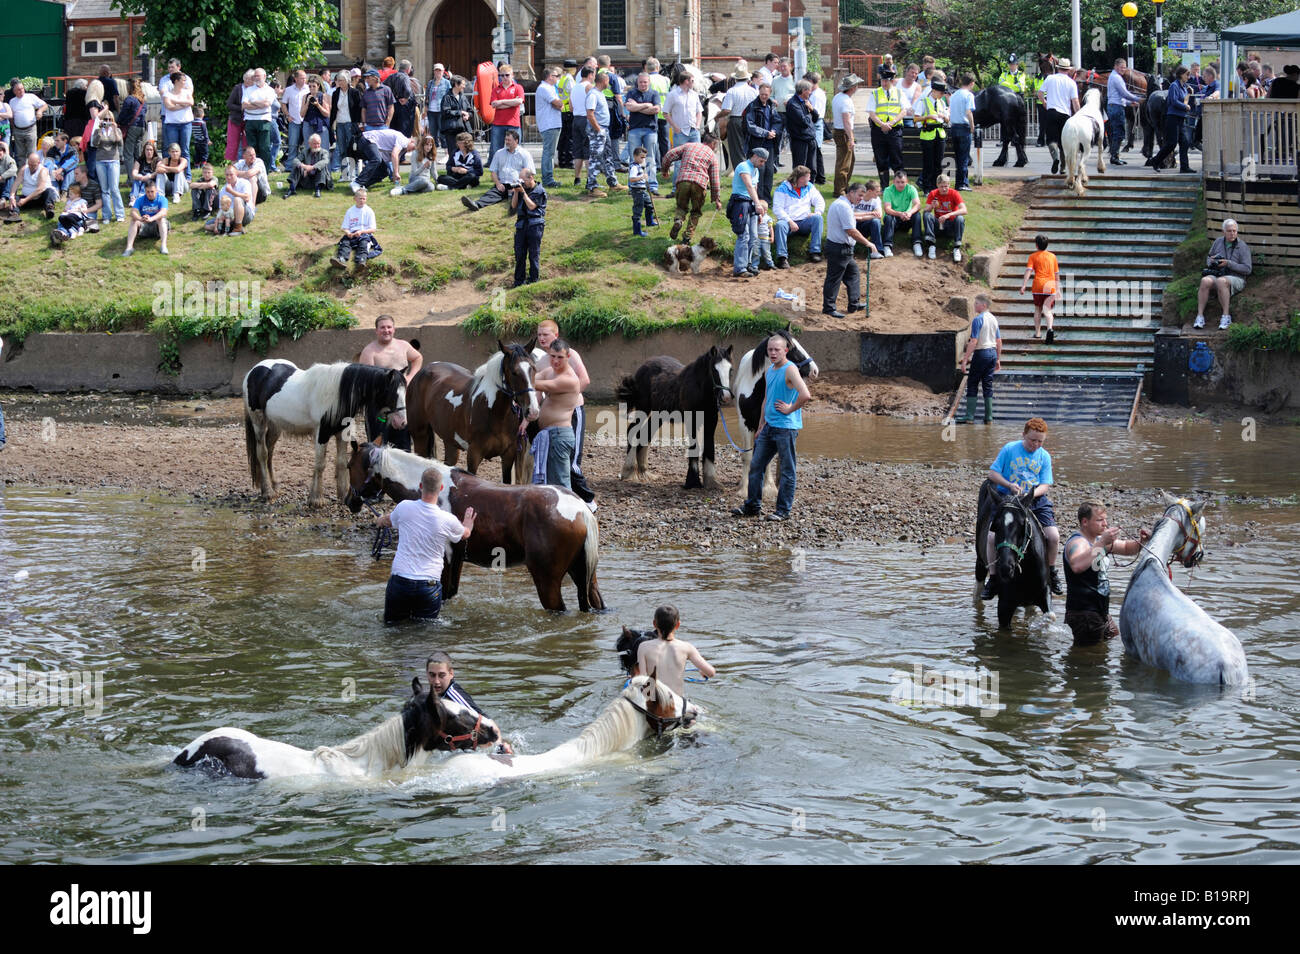 Gypsy travellers washing horses in River Eden. Appleby Horse Fair. Appleby-in-Westmorland, Cumbria, England, United Kingdom. Stock Photo